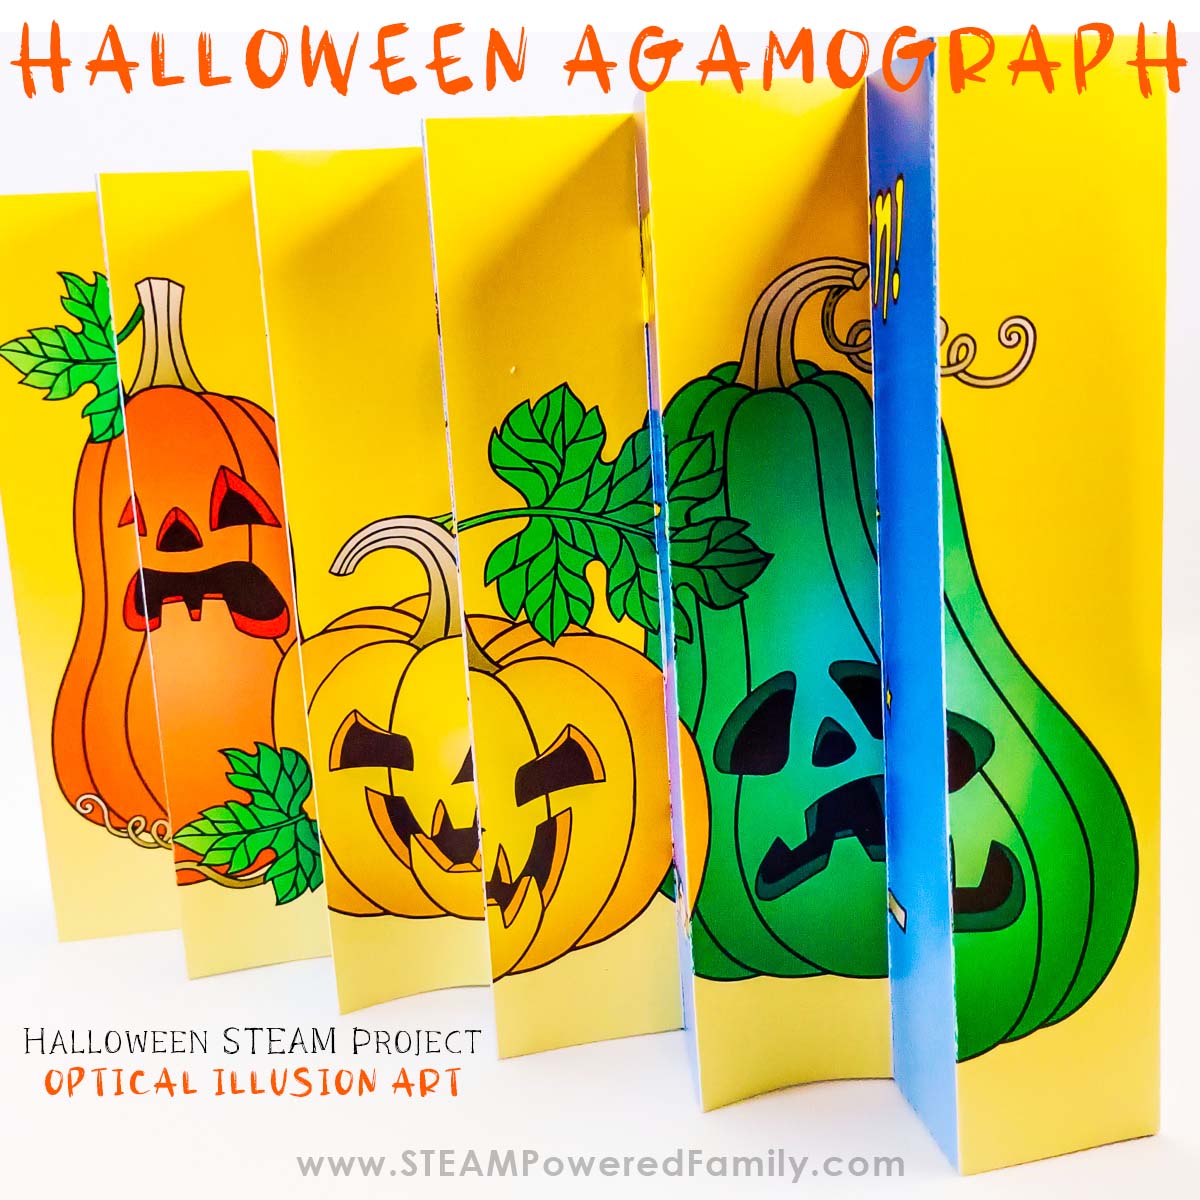 Halloween Agamograph Project